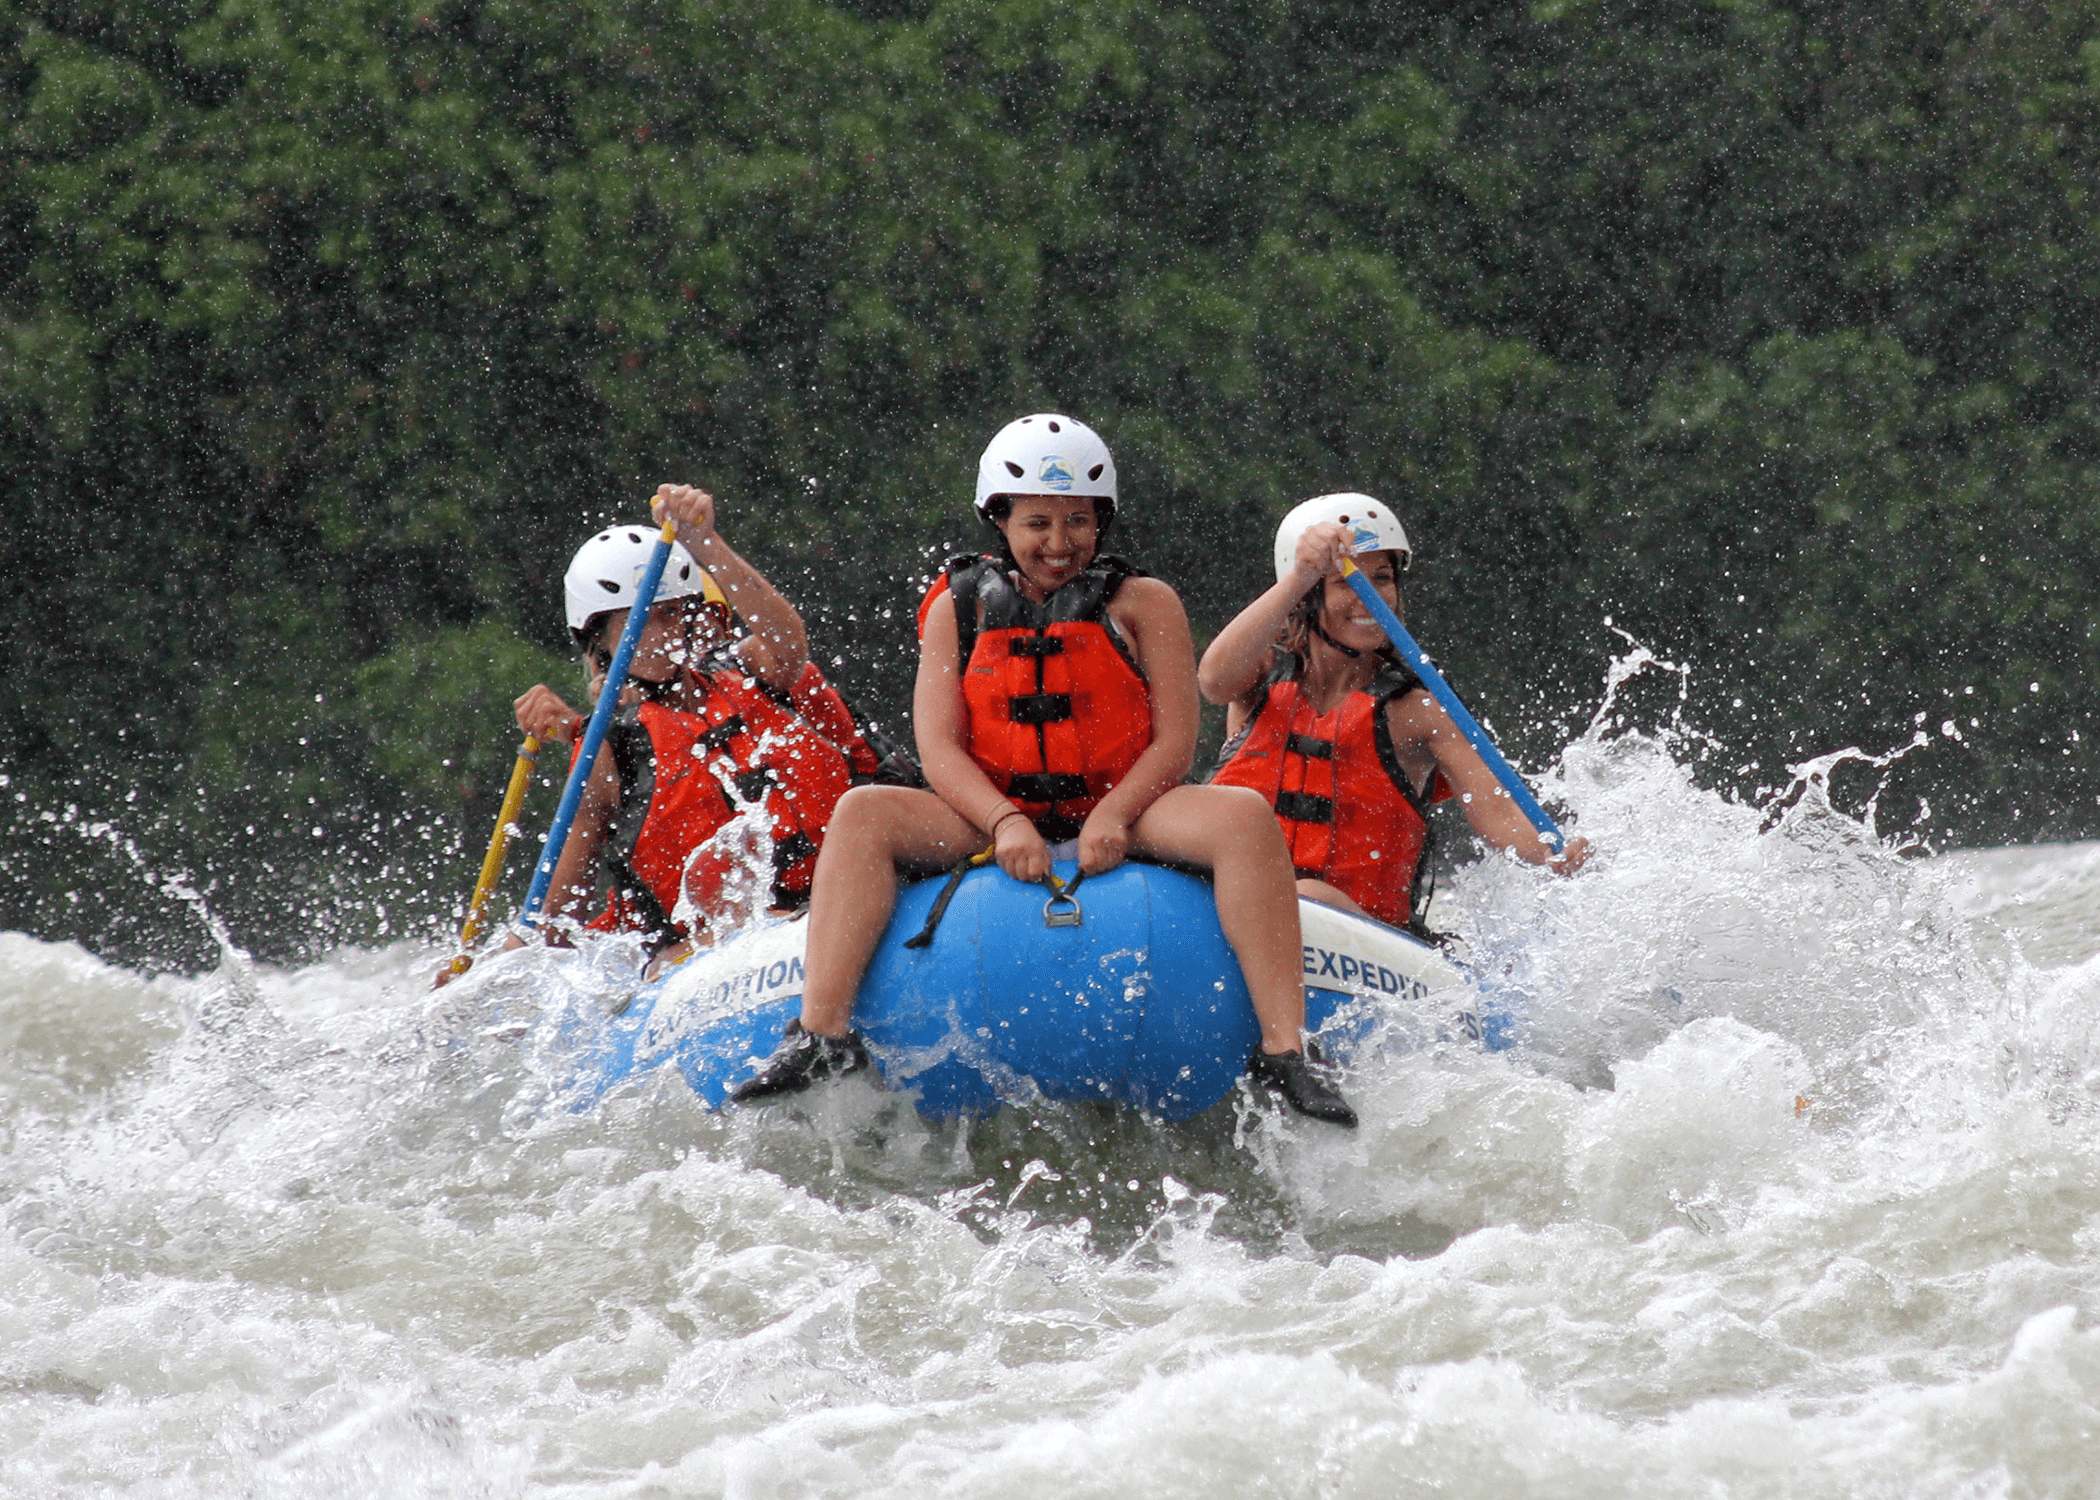 Rafting R?o Savegre with Extreme M&R Adventures